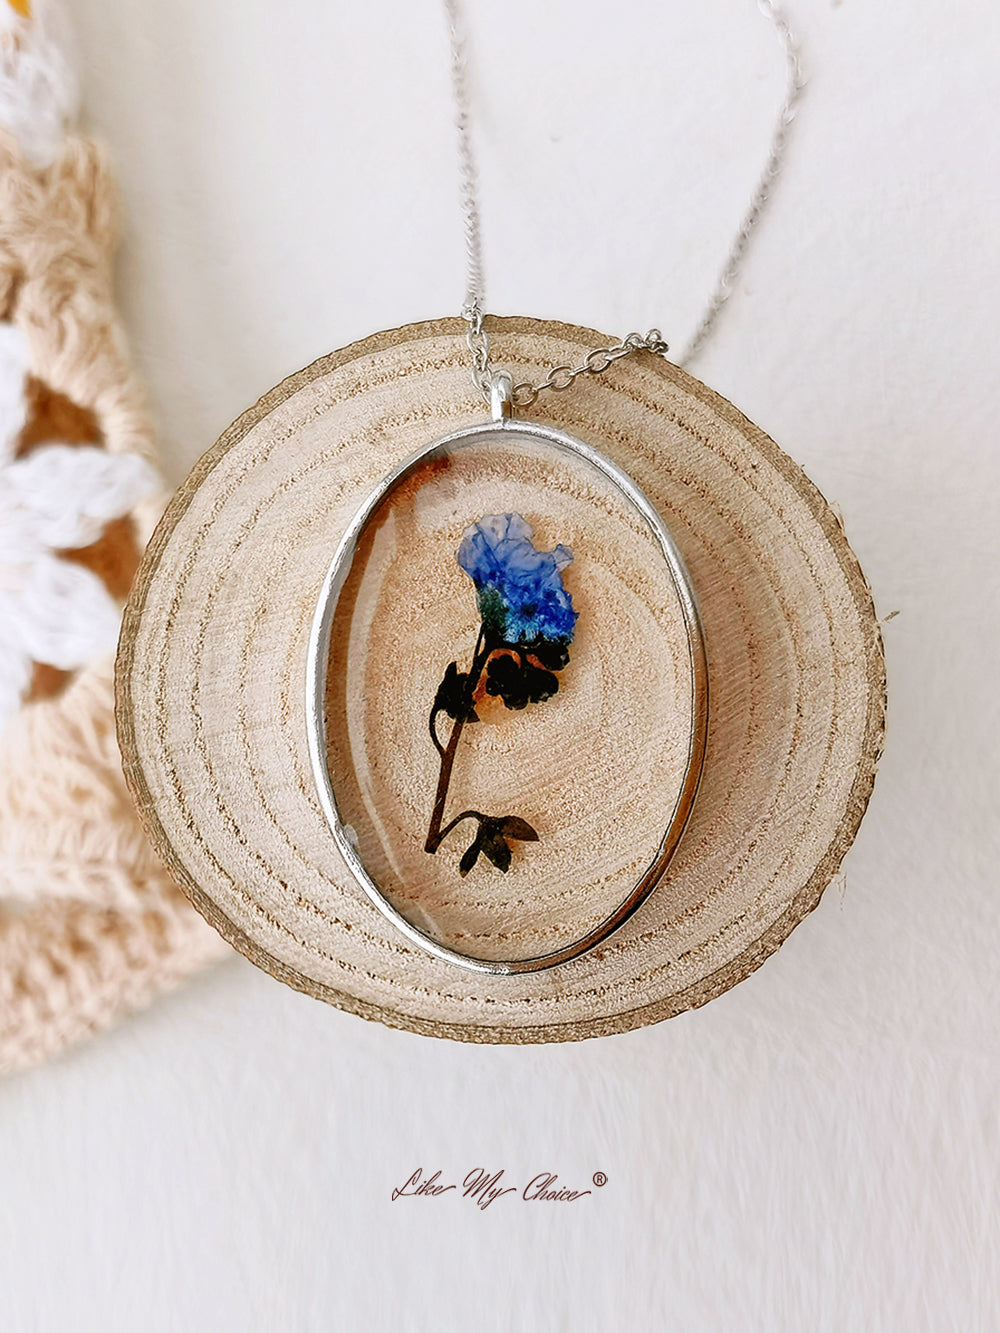 Pressed Flower Necklace -  Forget Me Not Flower Oval